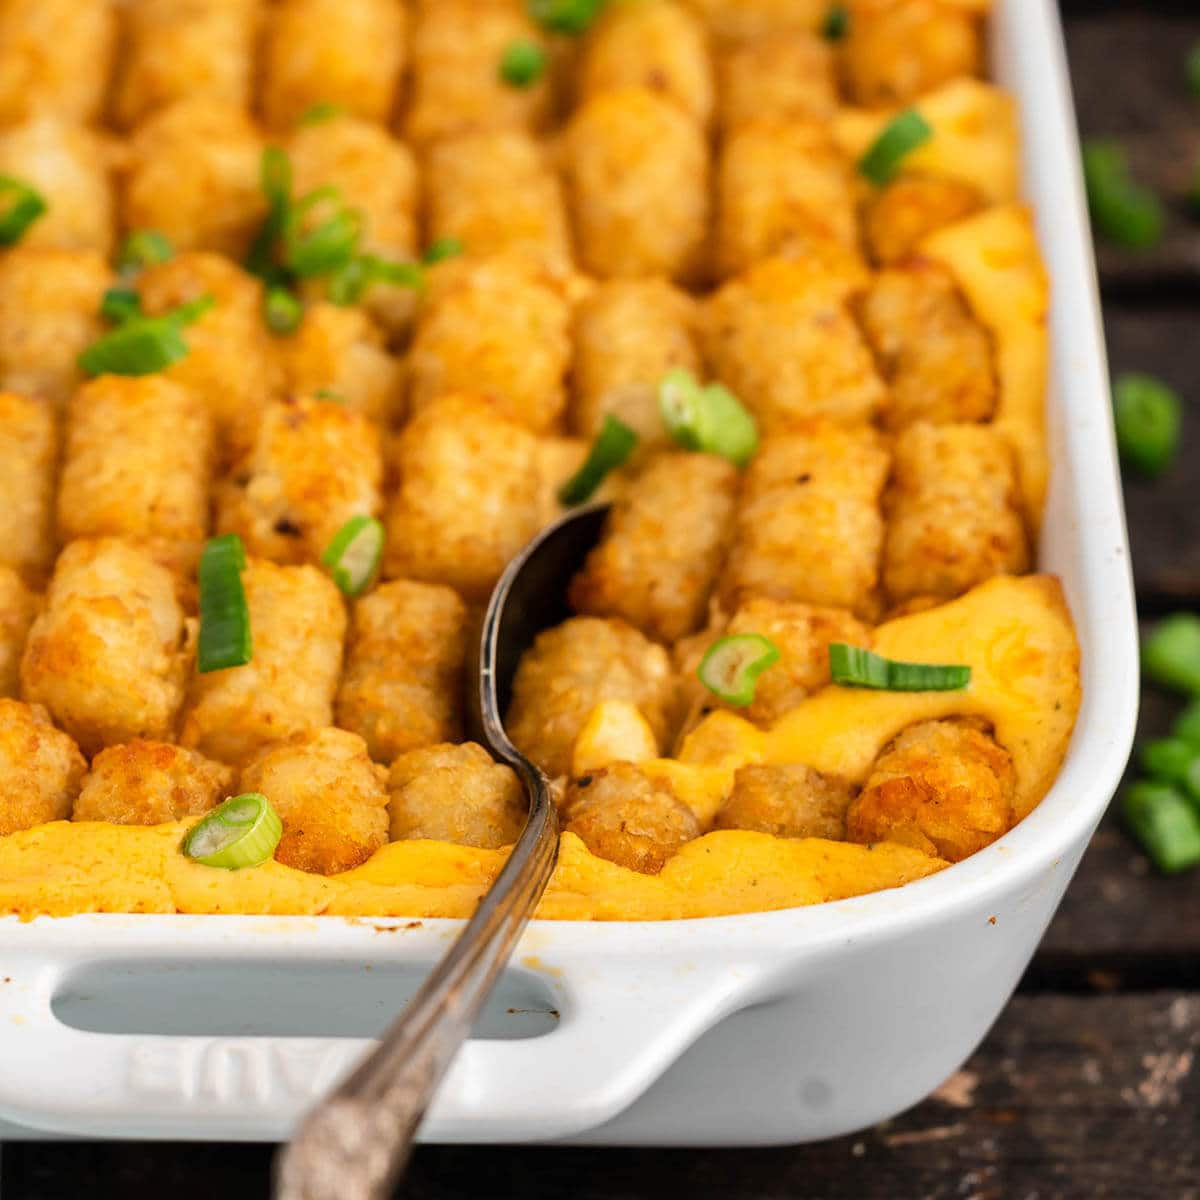 Tater Tot Casserole with serving spoon.